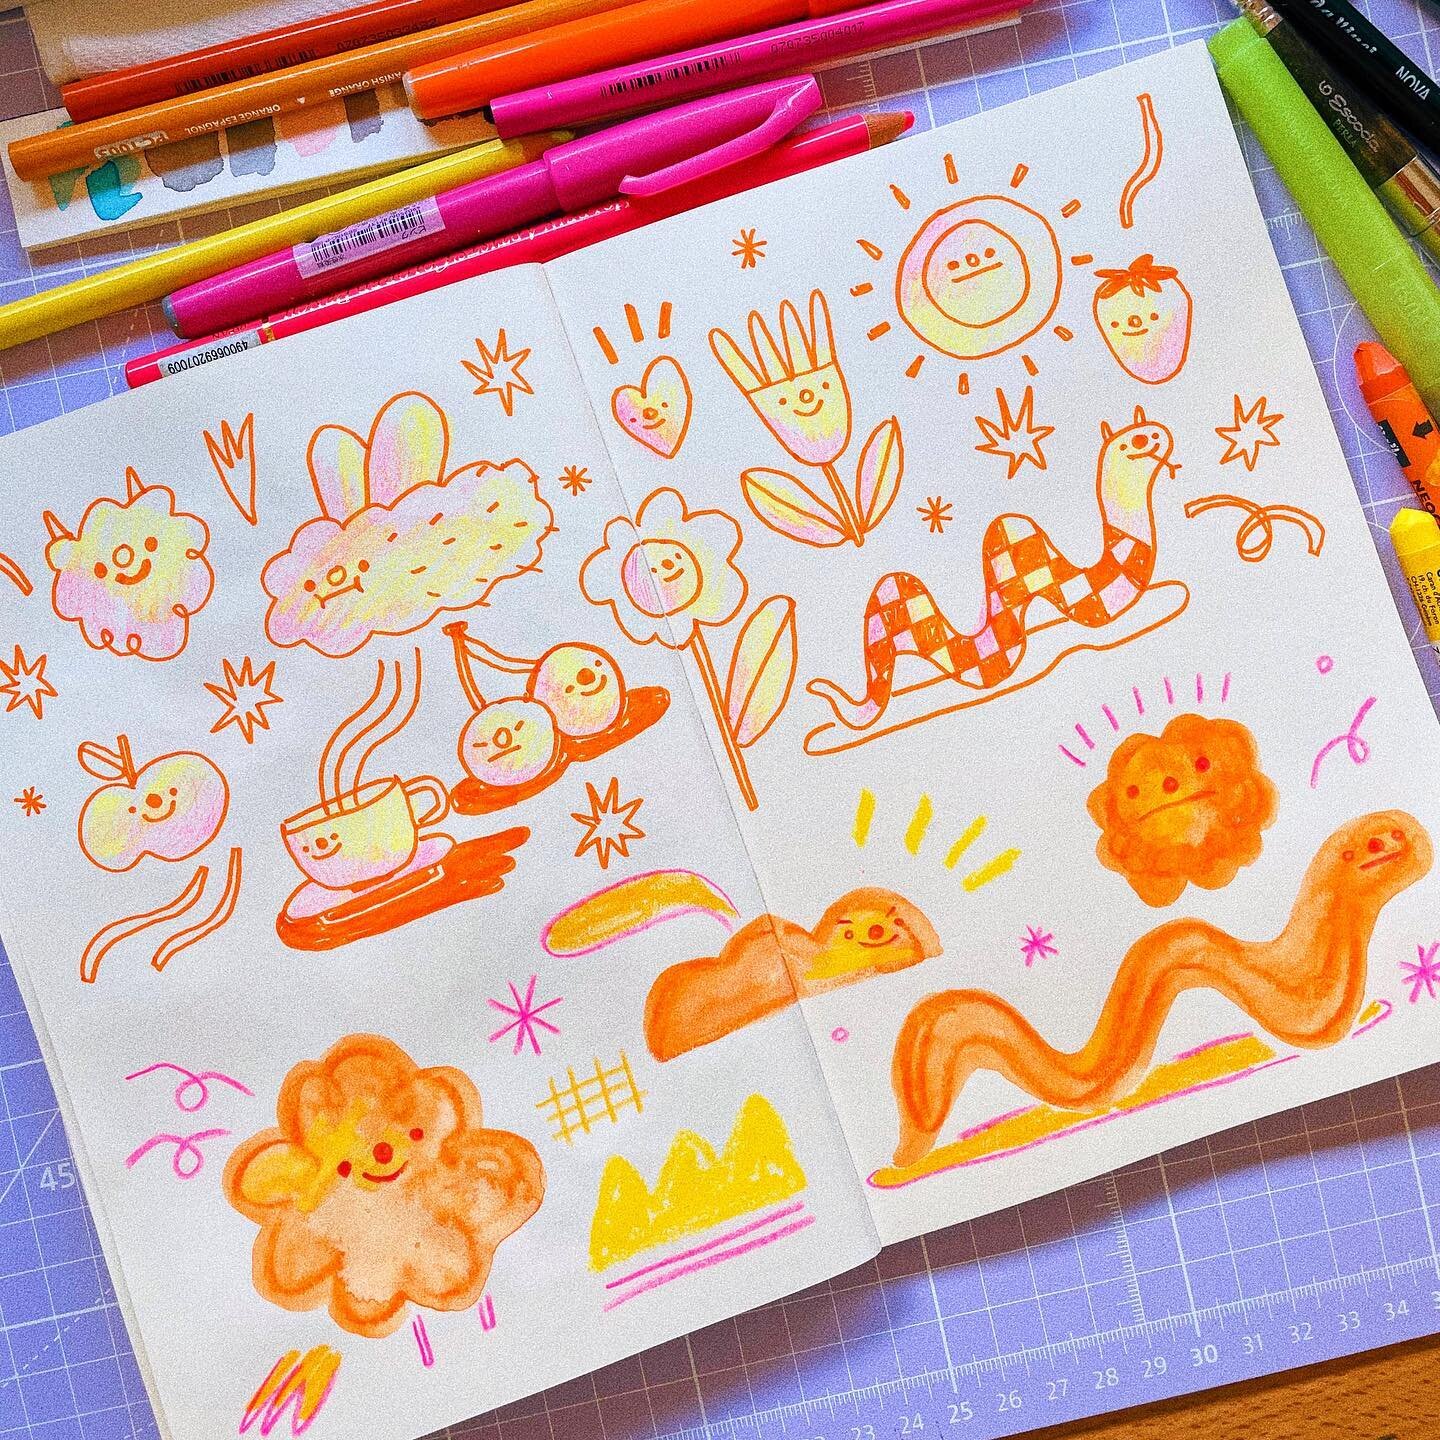 ✿ LIFE UPDATE ✿ 🙋🏻&zwj;♀️ Lately, I&rsquo;ve started to take a liking to a pink &amp; orange color palett?! Whut??! 💖🧡💛 Not too sure why tho. 😅 I&rsquo;ve been so comfortable with my pinks &amp; blues for the longest time, but I&rsquo;ve starte